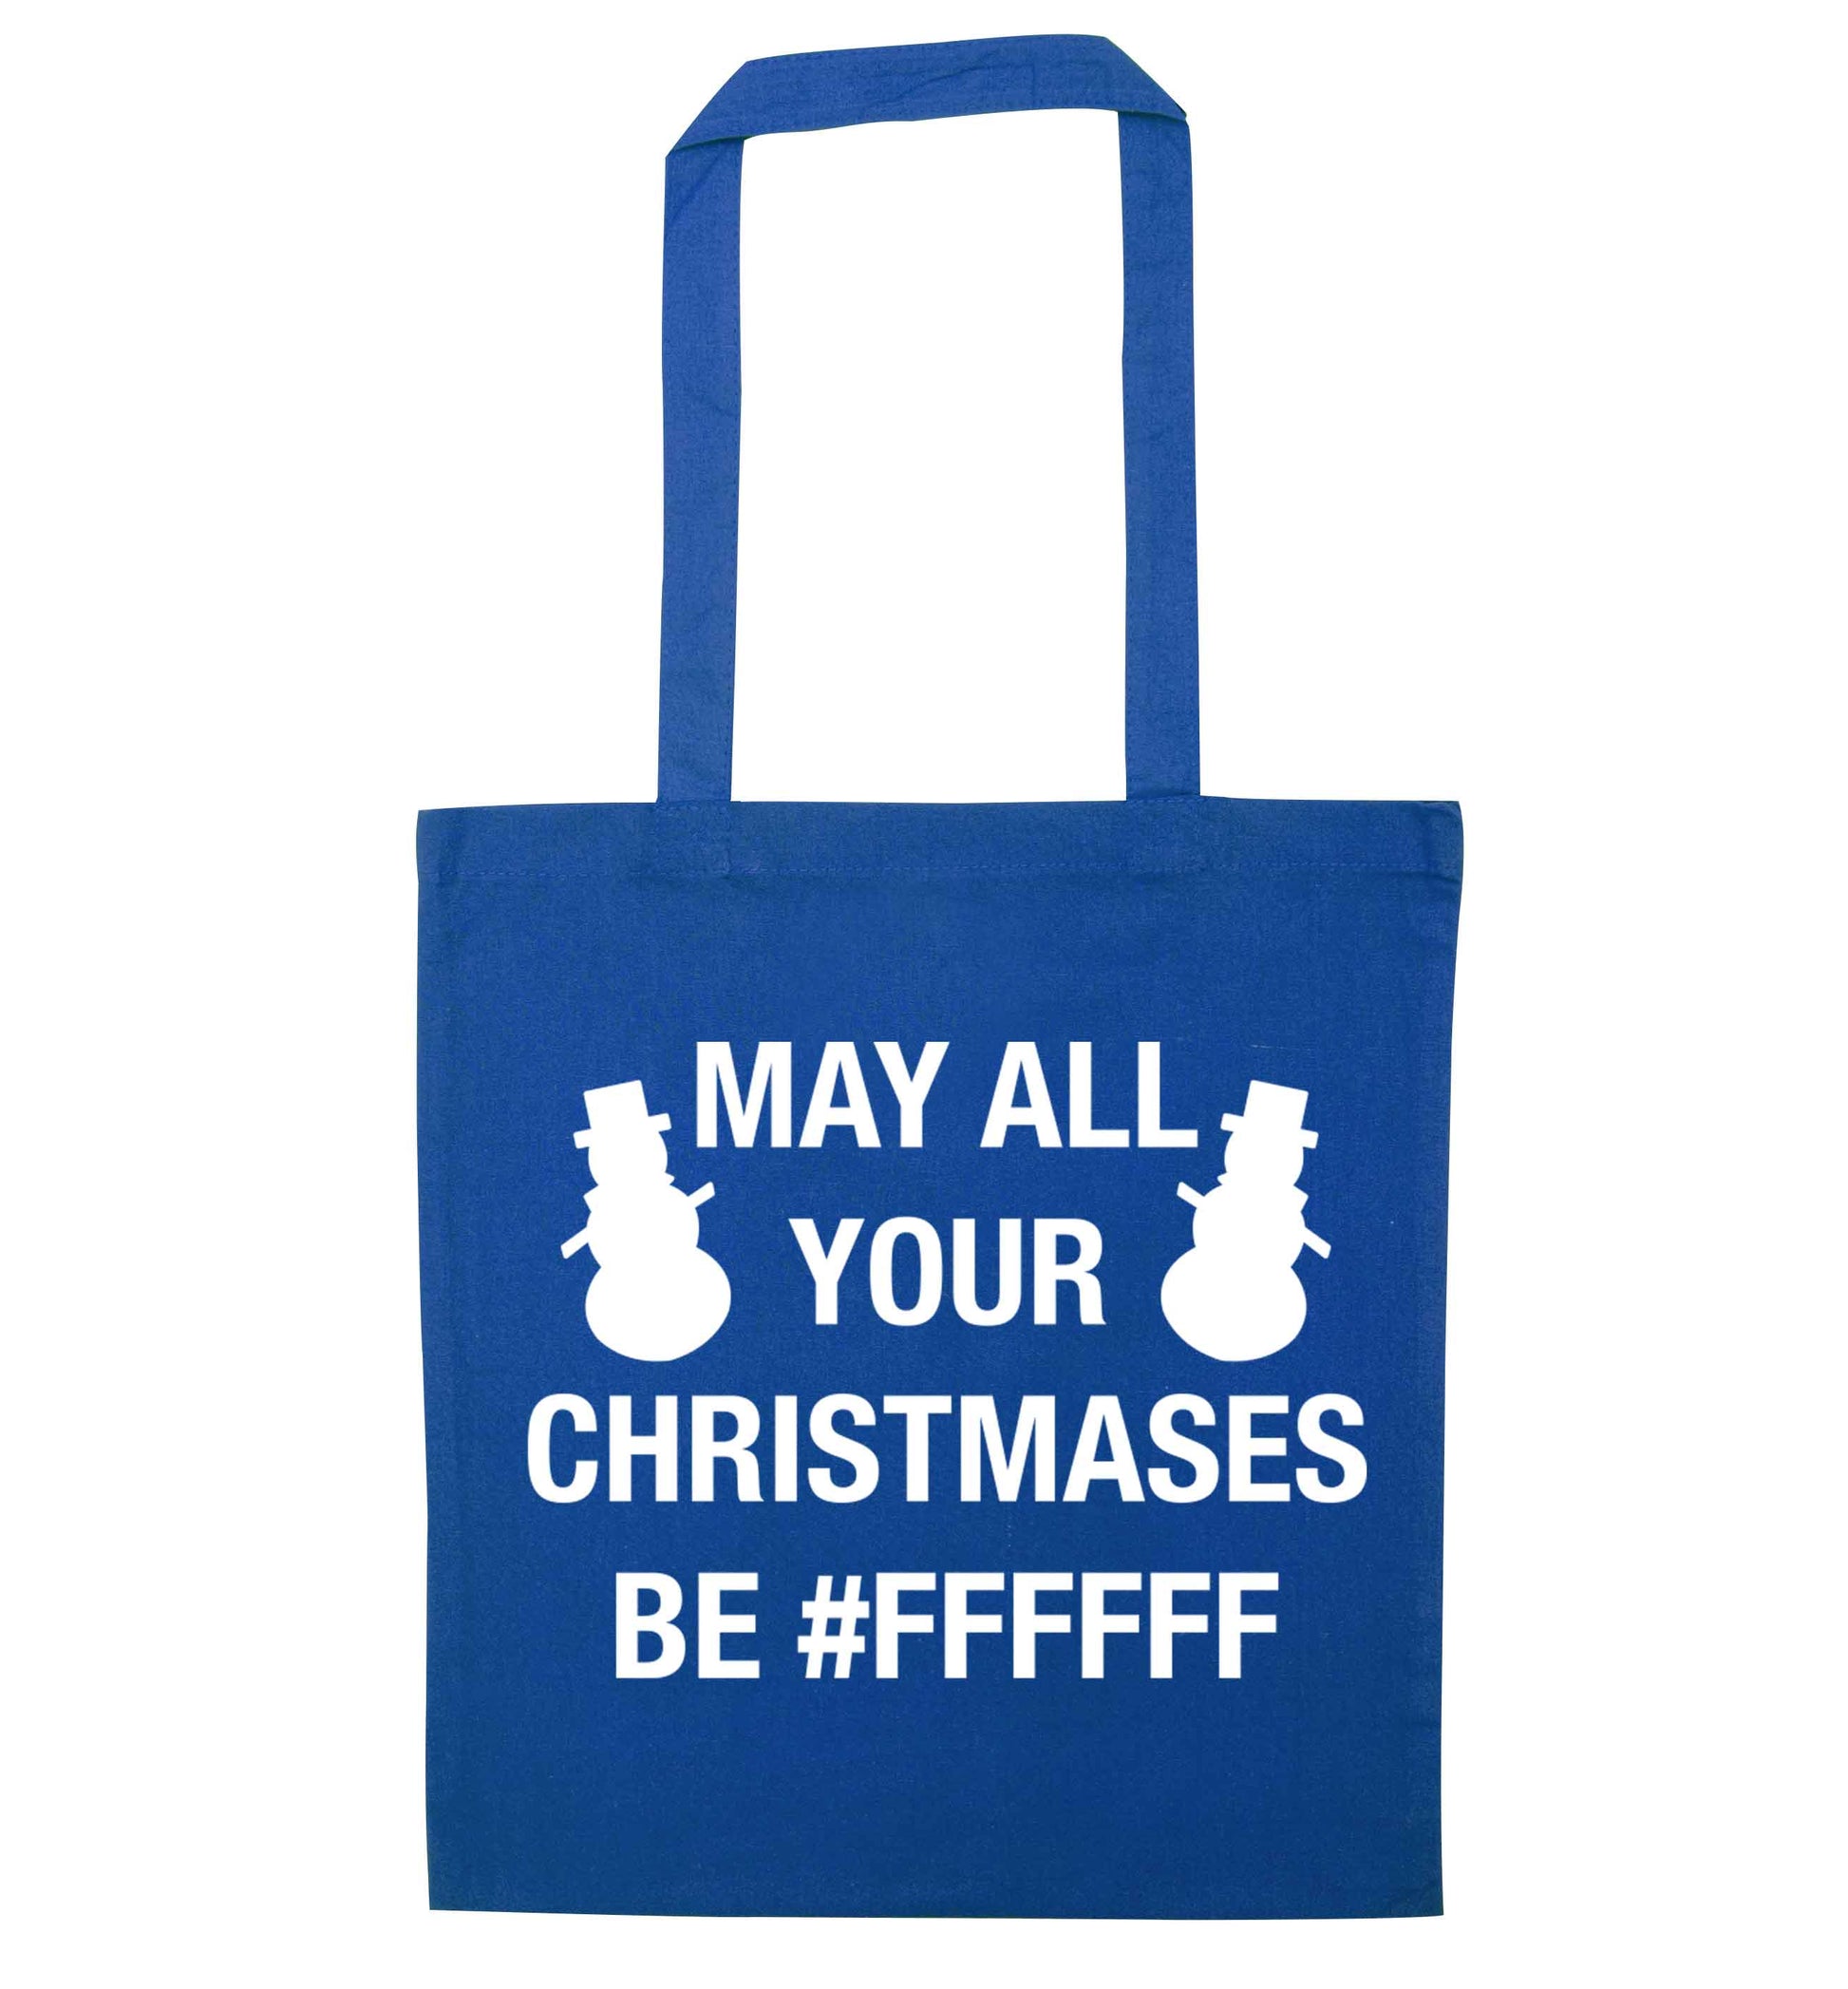 May all your Christmases be #FFFFFF blue tote bag